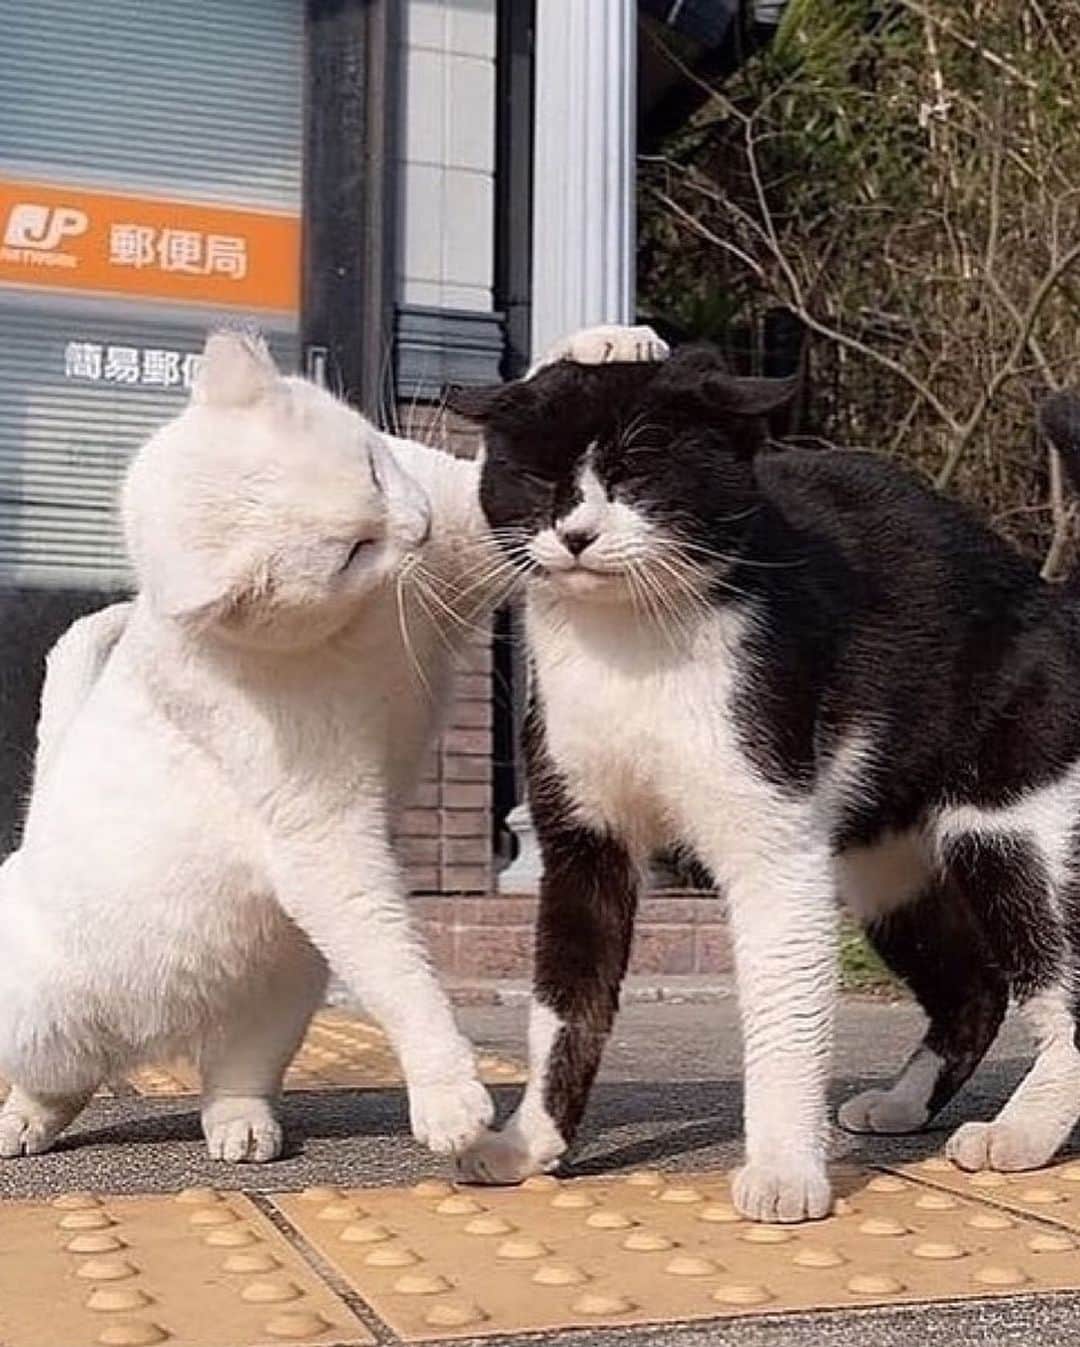 Cute Pets Dogs Catsさんのインスタグラム写真 - (Cute Pets Dogs CatsInstagram)「Cat group. 😍  Credit: adorable @simabossneko (*read note below) ** For all crediting issues and removals pls 𝐄𝐦𝐚𝐢𝐥 𝐮𝐬 ☺️  𝐍𝐨𝐭𝐞: we don’t own this video/pics, all rights go to their respective owners. If owner is not provided, tagged (meaning we couldn’t find who is the owner), 𝐩𝐥𝐬 𝐄𝐦𝐚𝐢𝐥 𝐮𝐬 with 𝐬𝐮𝐛𝐣𝐞𝐜𝐭 “𝐂𝐫𝐞𝐝𝐢𝐭 𝐈𝐬𝐬𝐮𝐞𝐬” and 𝐨𝐰𝐧𝐞𝐫 𝐰𝐢𝐥𝐥 𝐛𝐞 𝐭𝐚𝐠𝐠𝐞𝐝 𝐬𝐡𝐨𝐫𝐭𝐥𝐲 𝐚𝐟𝐭𝐞𝐫.  We have been building this community for over 6 years, but 𝐞𝐯𝐞𝐫𝐲 𝐫𝐞𝐩𝐨𝐫𝐭 𝐜𝐨𝐮𝐥𝐝 𝐠𝐞𝐭 𝐨𝐮𝐫 𝐩𝐚𝐠𝐞 𝐝𝐞𝐥𝐞𝐭𝐞𝐝, pls email us first. **  #catloversclub #cat #cats #catofinstagram」12月2日 21時54分 - dailycatclub